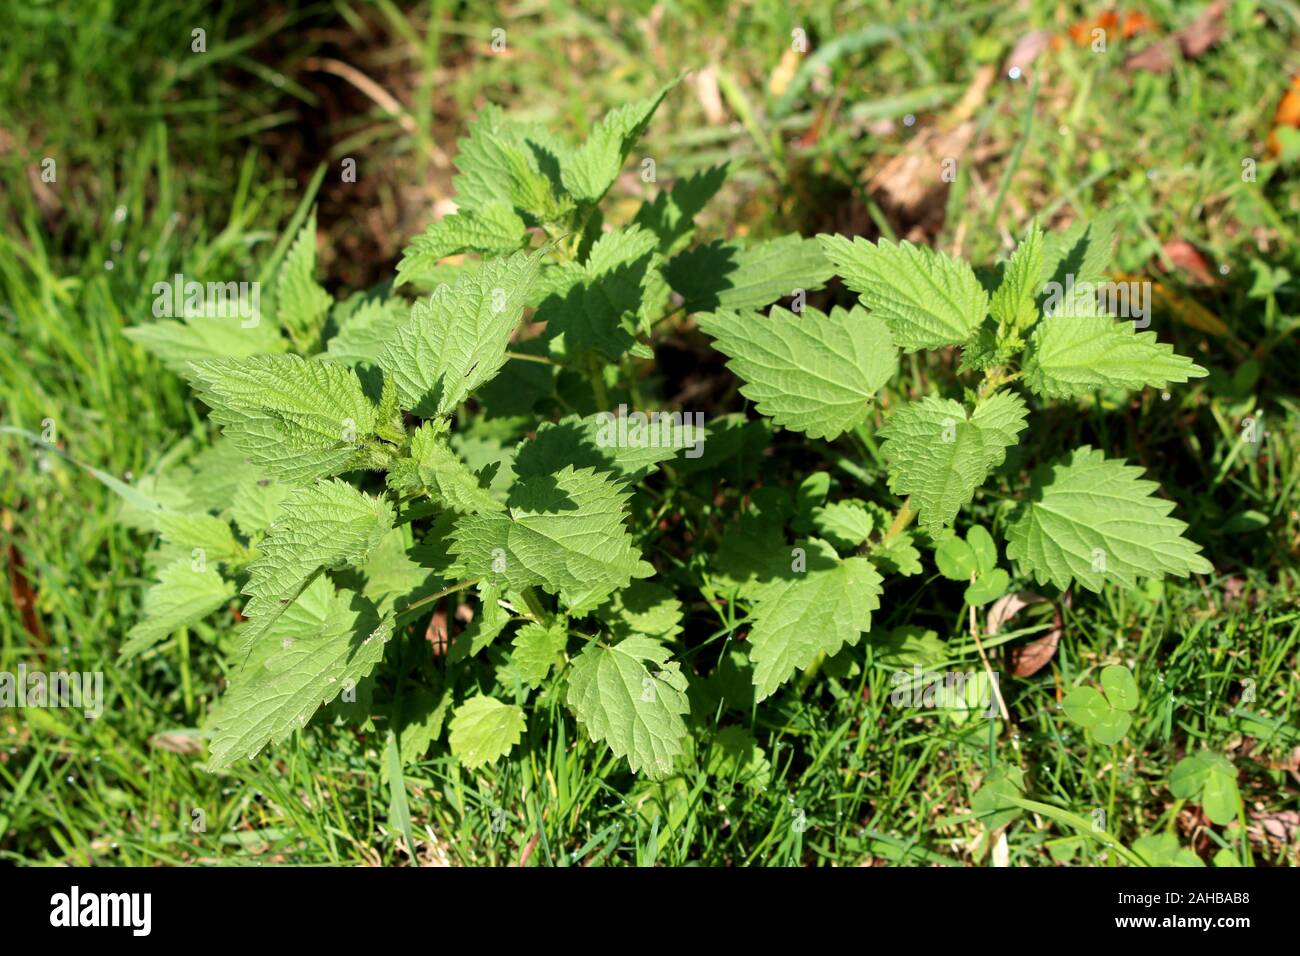 Top view of Common nettle or Urtica dioica or Stinging nettle or Nettle ...